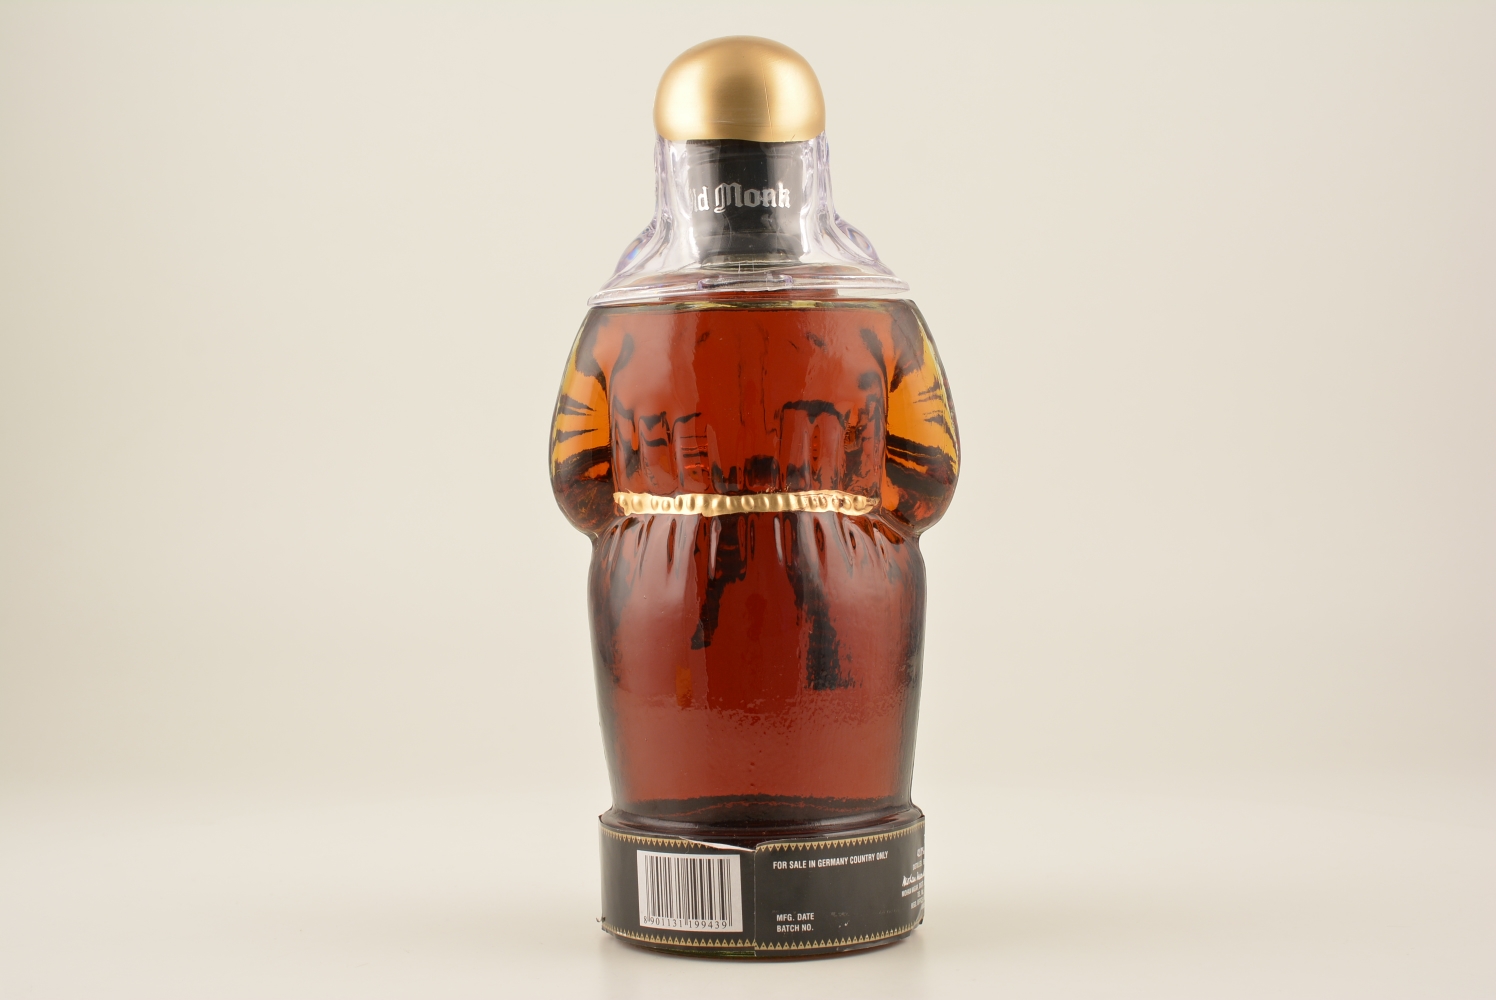 Old Monk Rum Supreme XXX Very Old 42,8% 0,7l